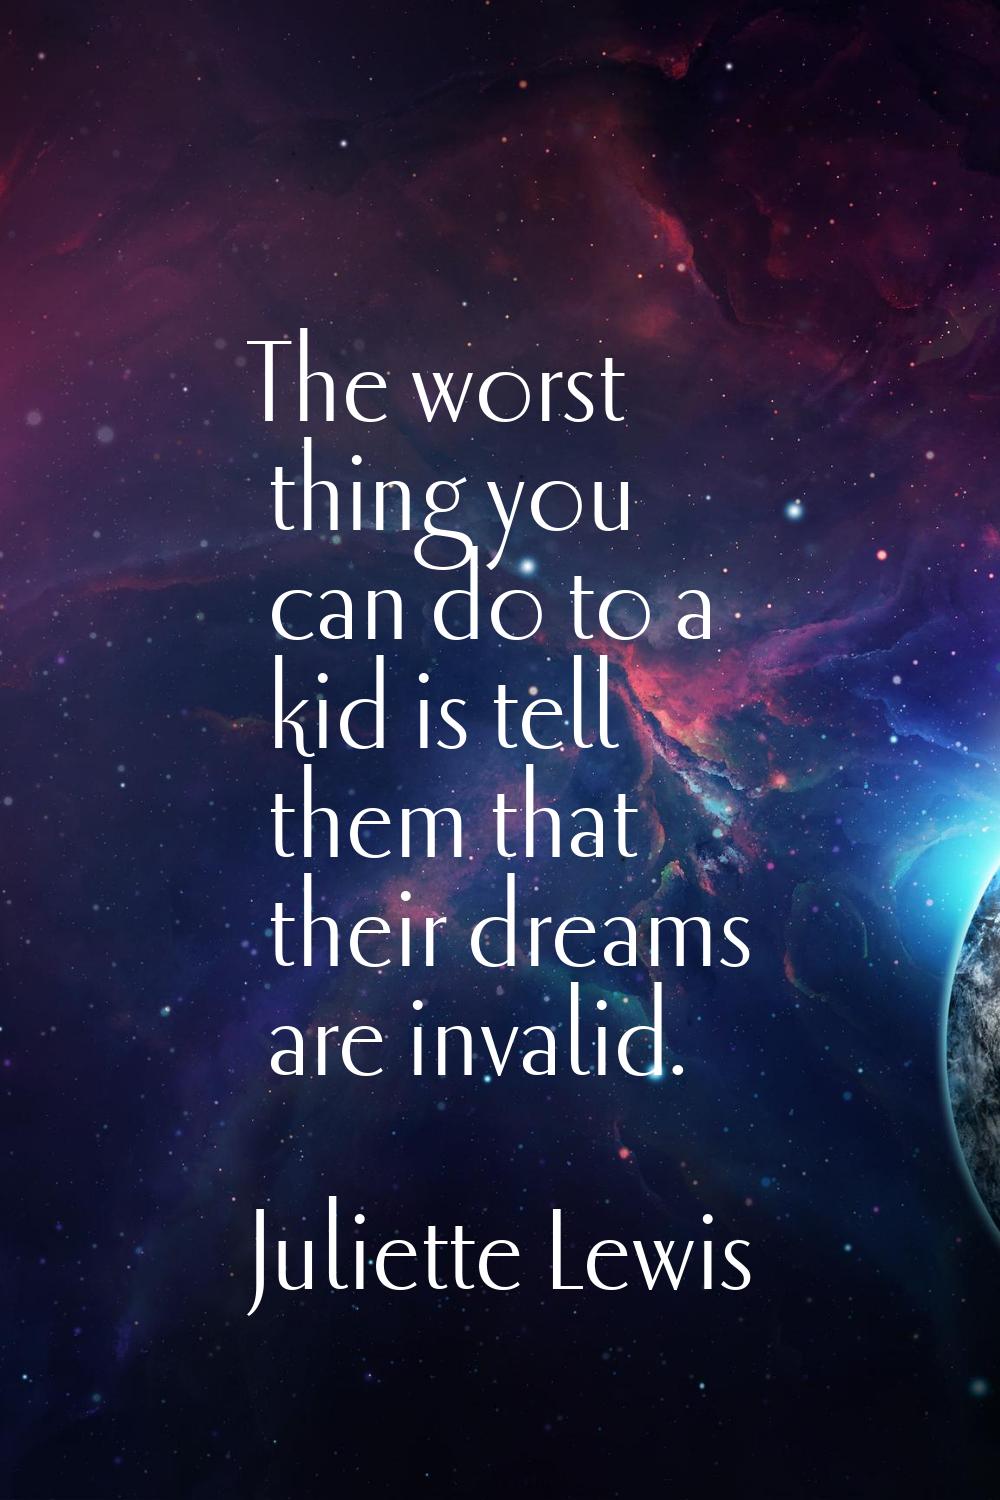 The worst thing you can do to a kid is tell them that their dreams are invalid.